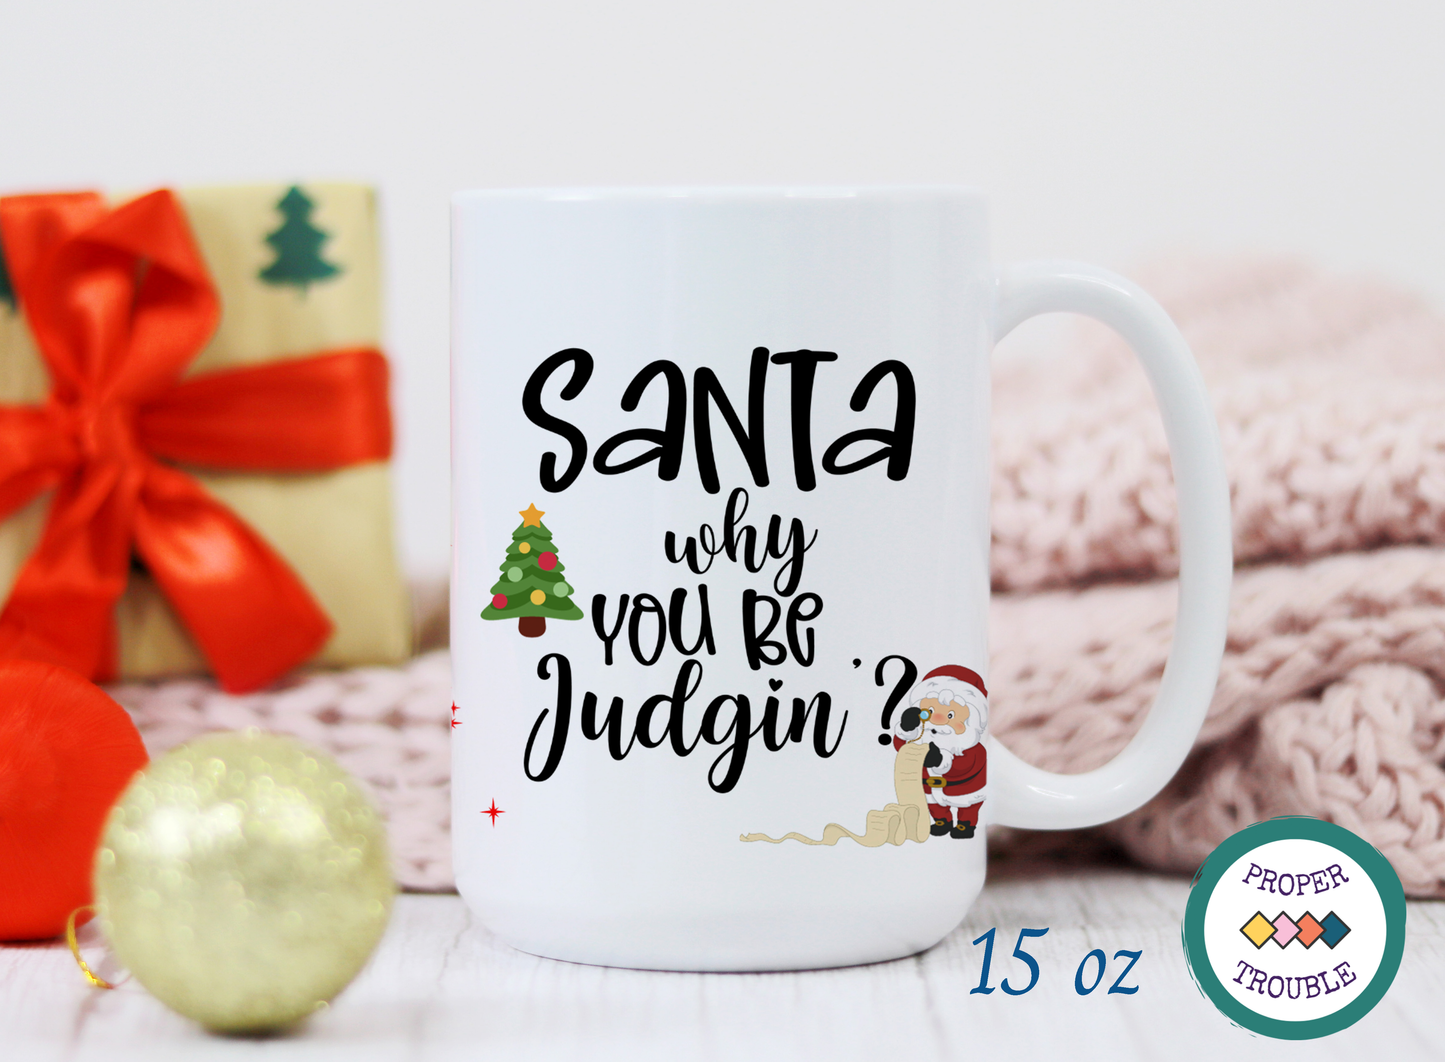 On The Naughty List And I Regret Nothing/ Santa Why You Be Judgin? Coffee / Tea Mug